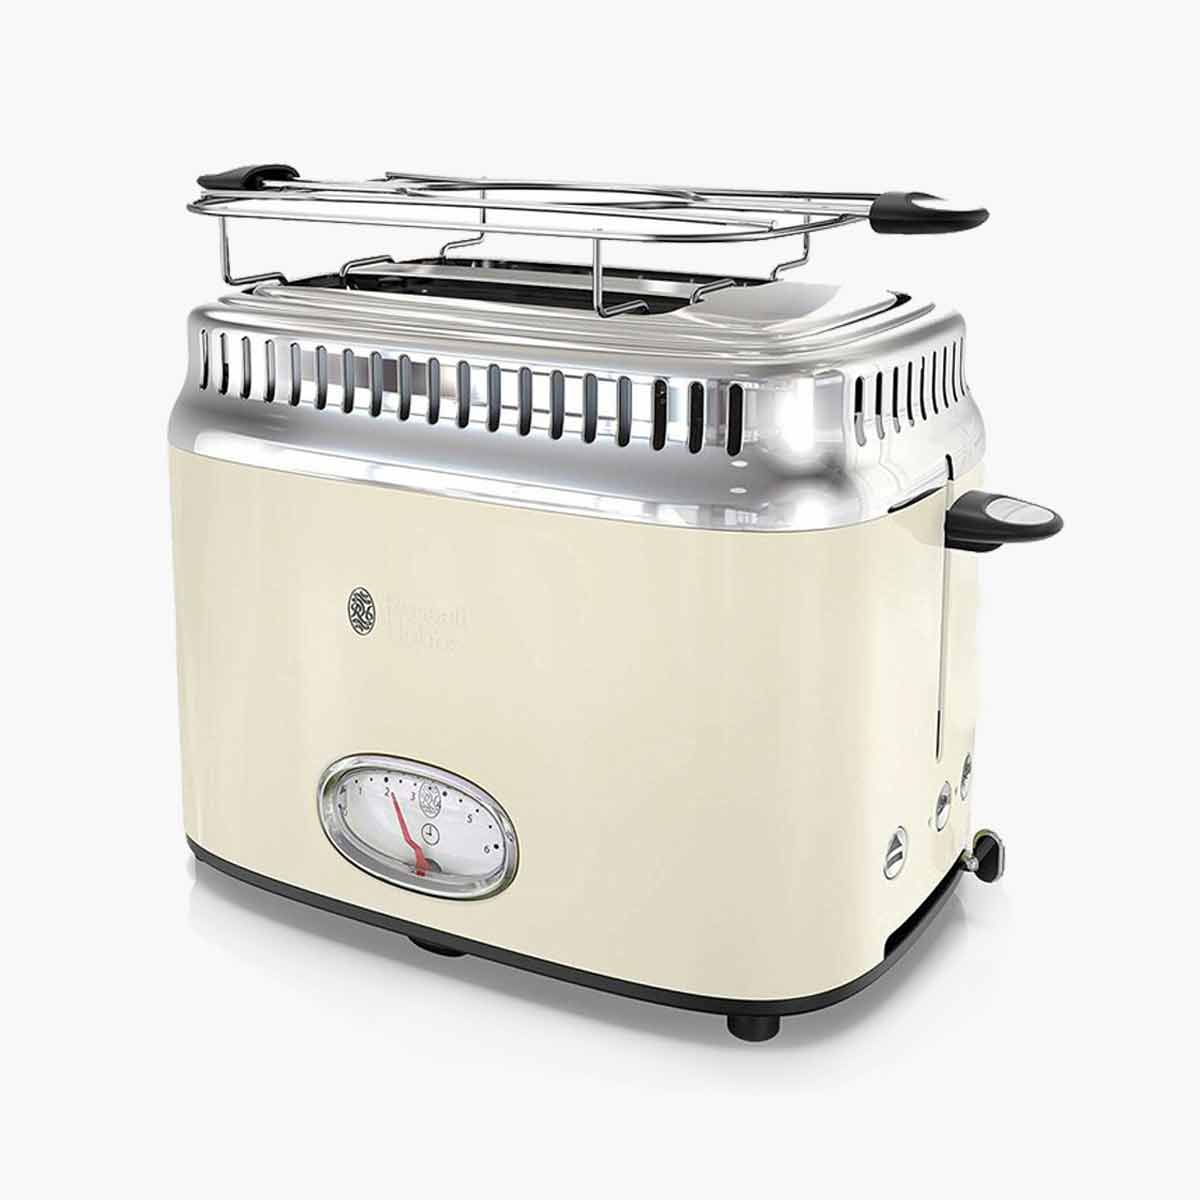 An off-white Russell Hobbs 2-slice retro toaster.